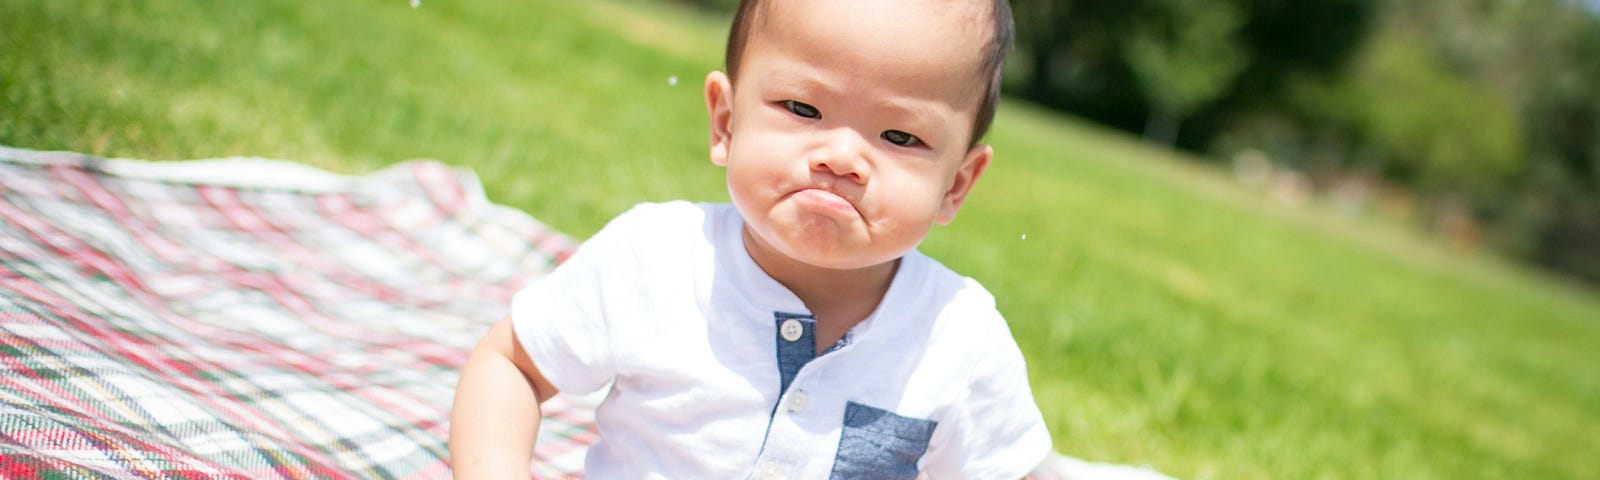 Toddler making a grumpy face while sitting on a plaid picnic blanket laid on a field of grass. Grumpy face could denote a negative attitude.